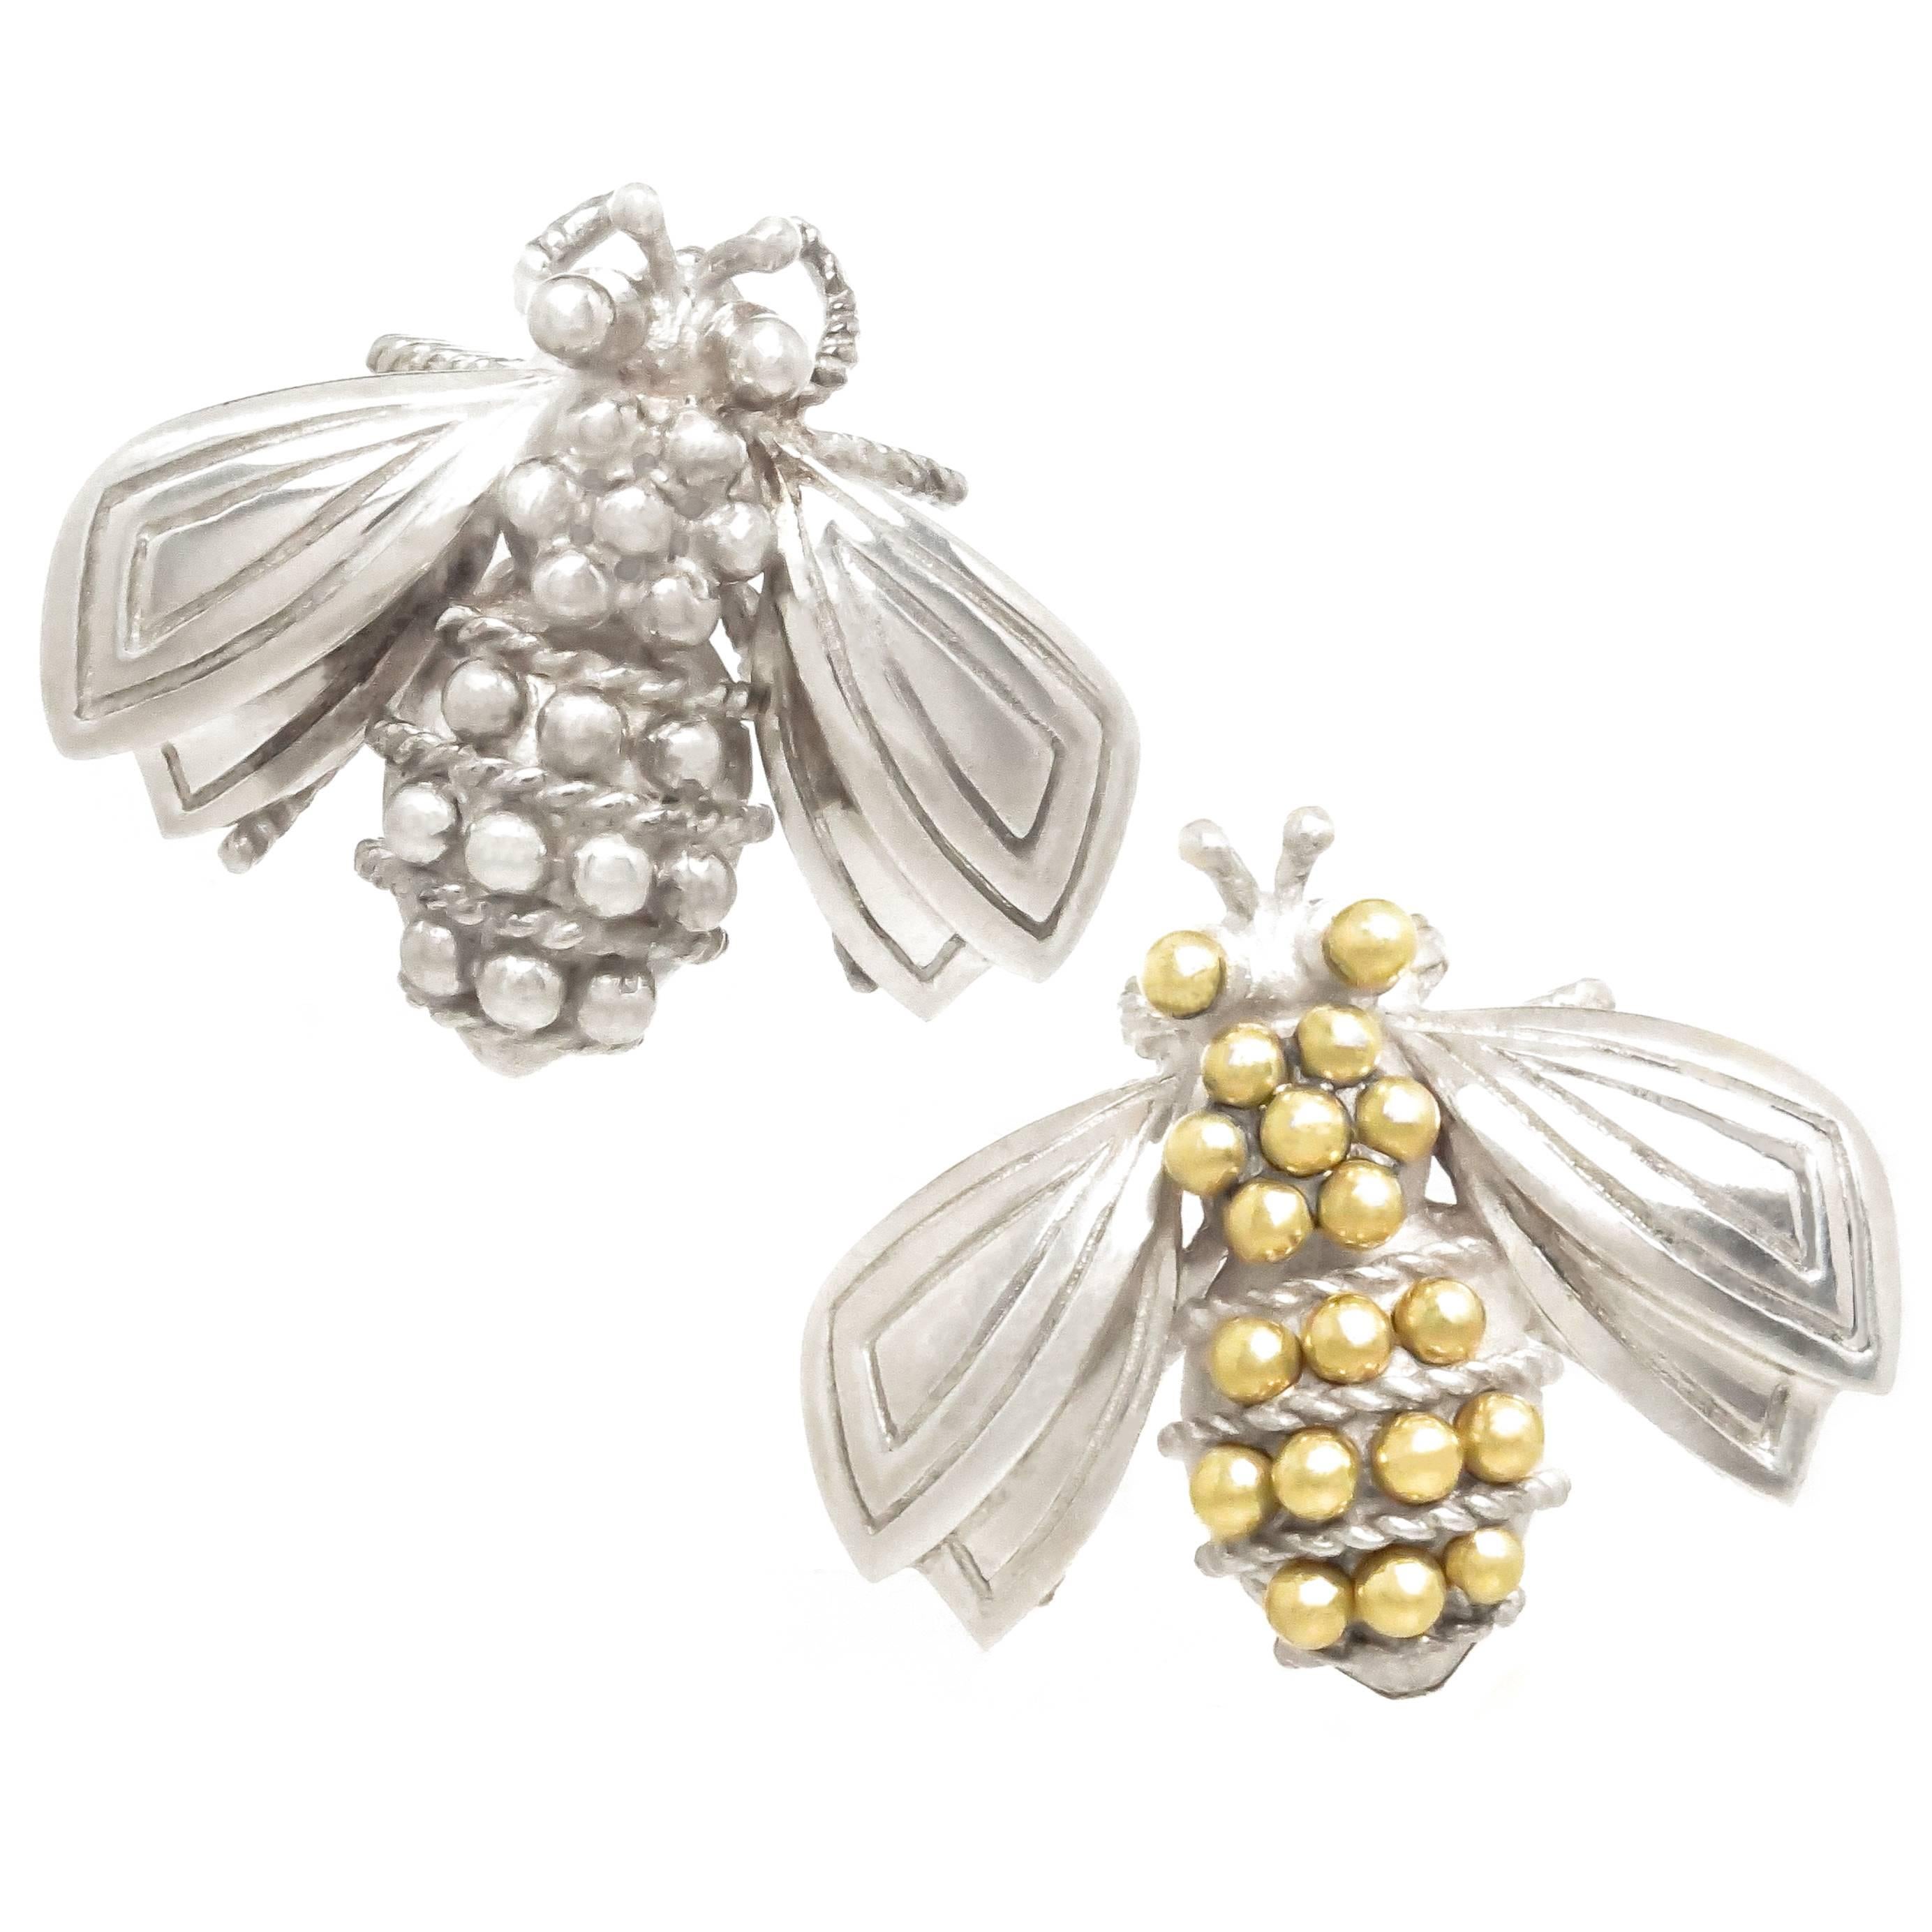 Tiffany & Co. Silver and Gold Bee Pins